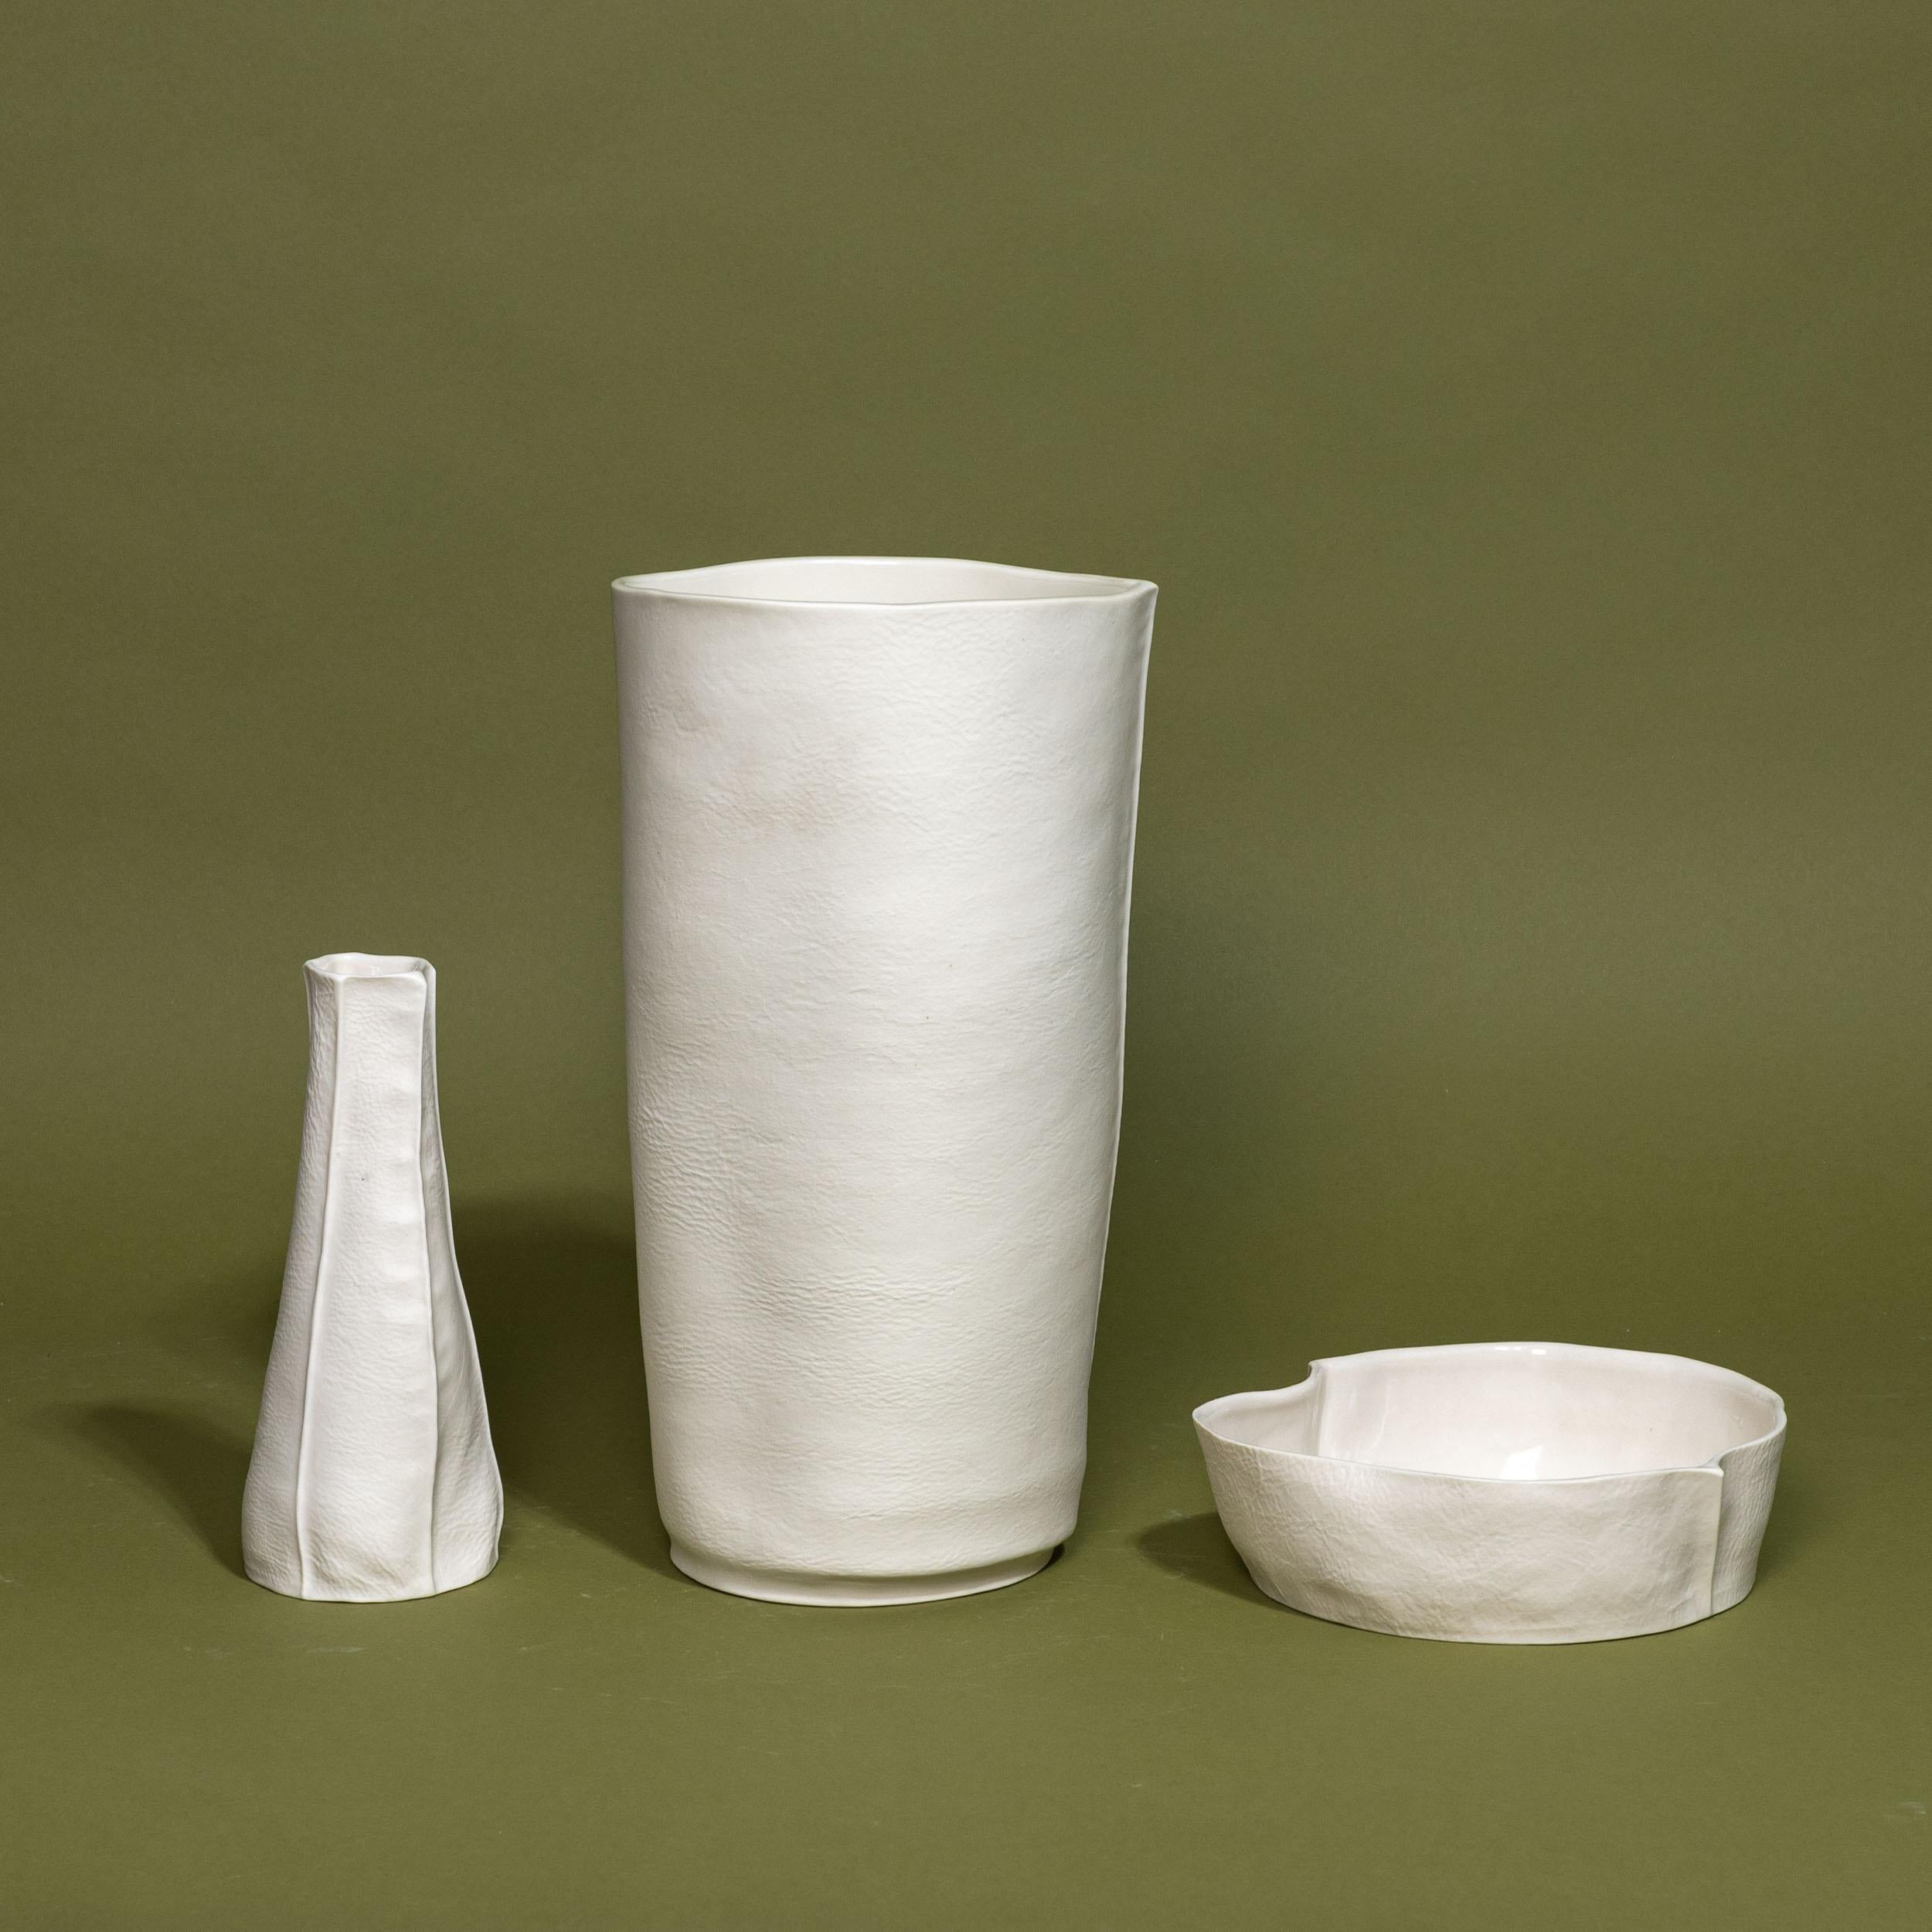 A grouping of one-of-a-kind Kawa Series items that are handcrafted by Luft Tanaka Studio by casting porcelain into sewn leather molds. 

Sold as a set of 3 items: 2 vases and a catchall dish. 

As a result of the production process, each item is